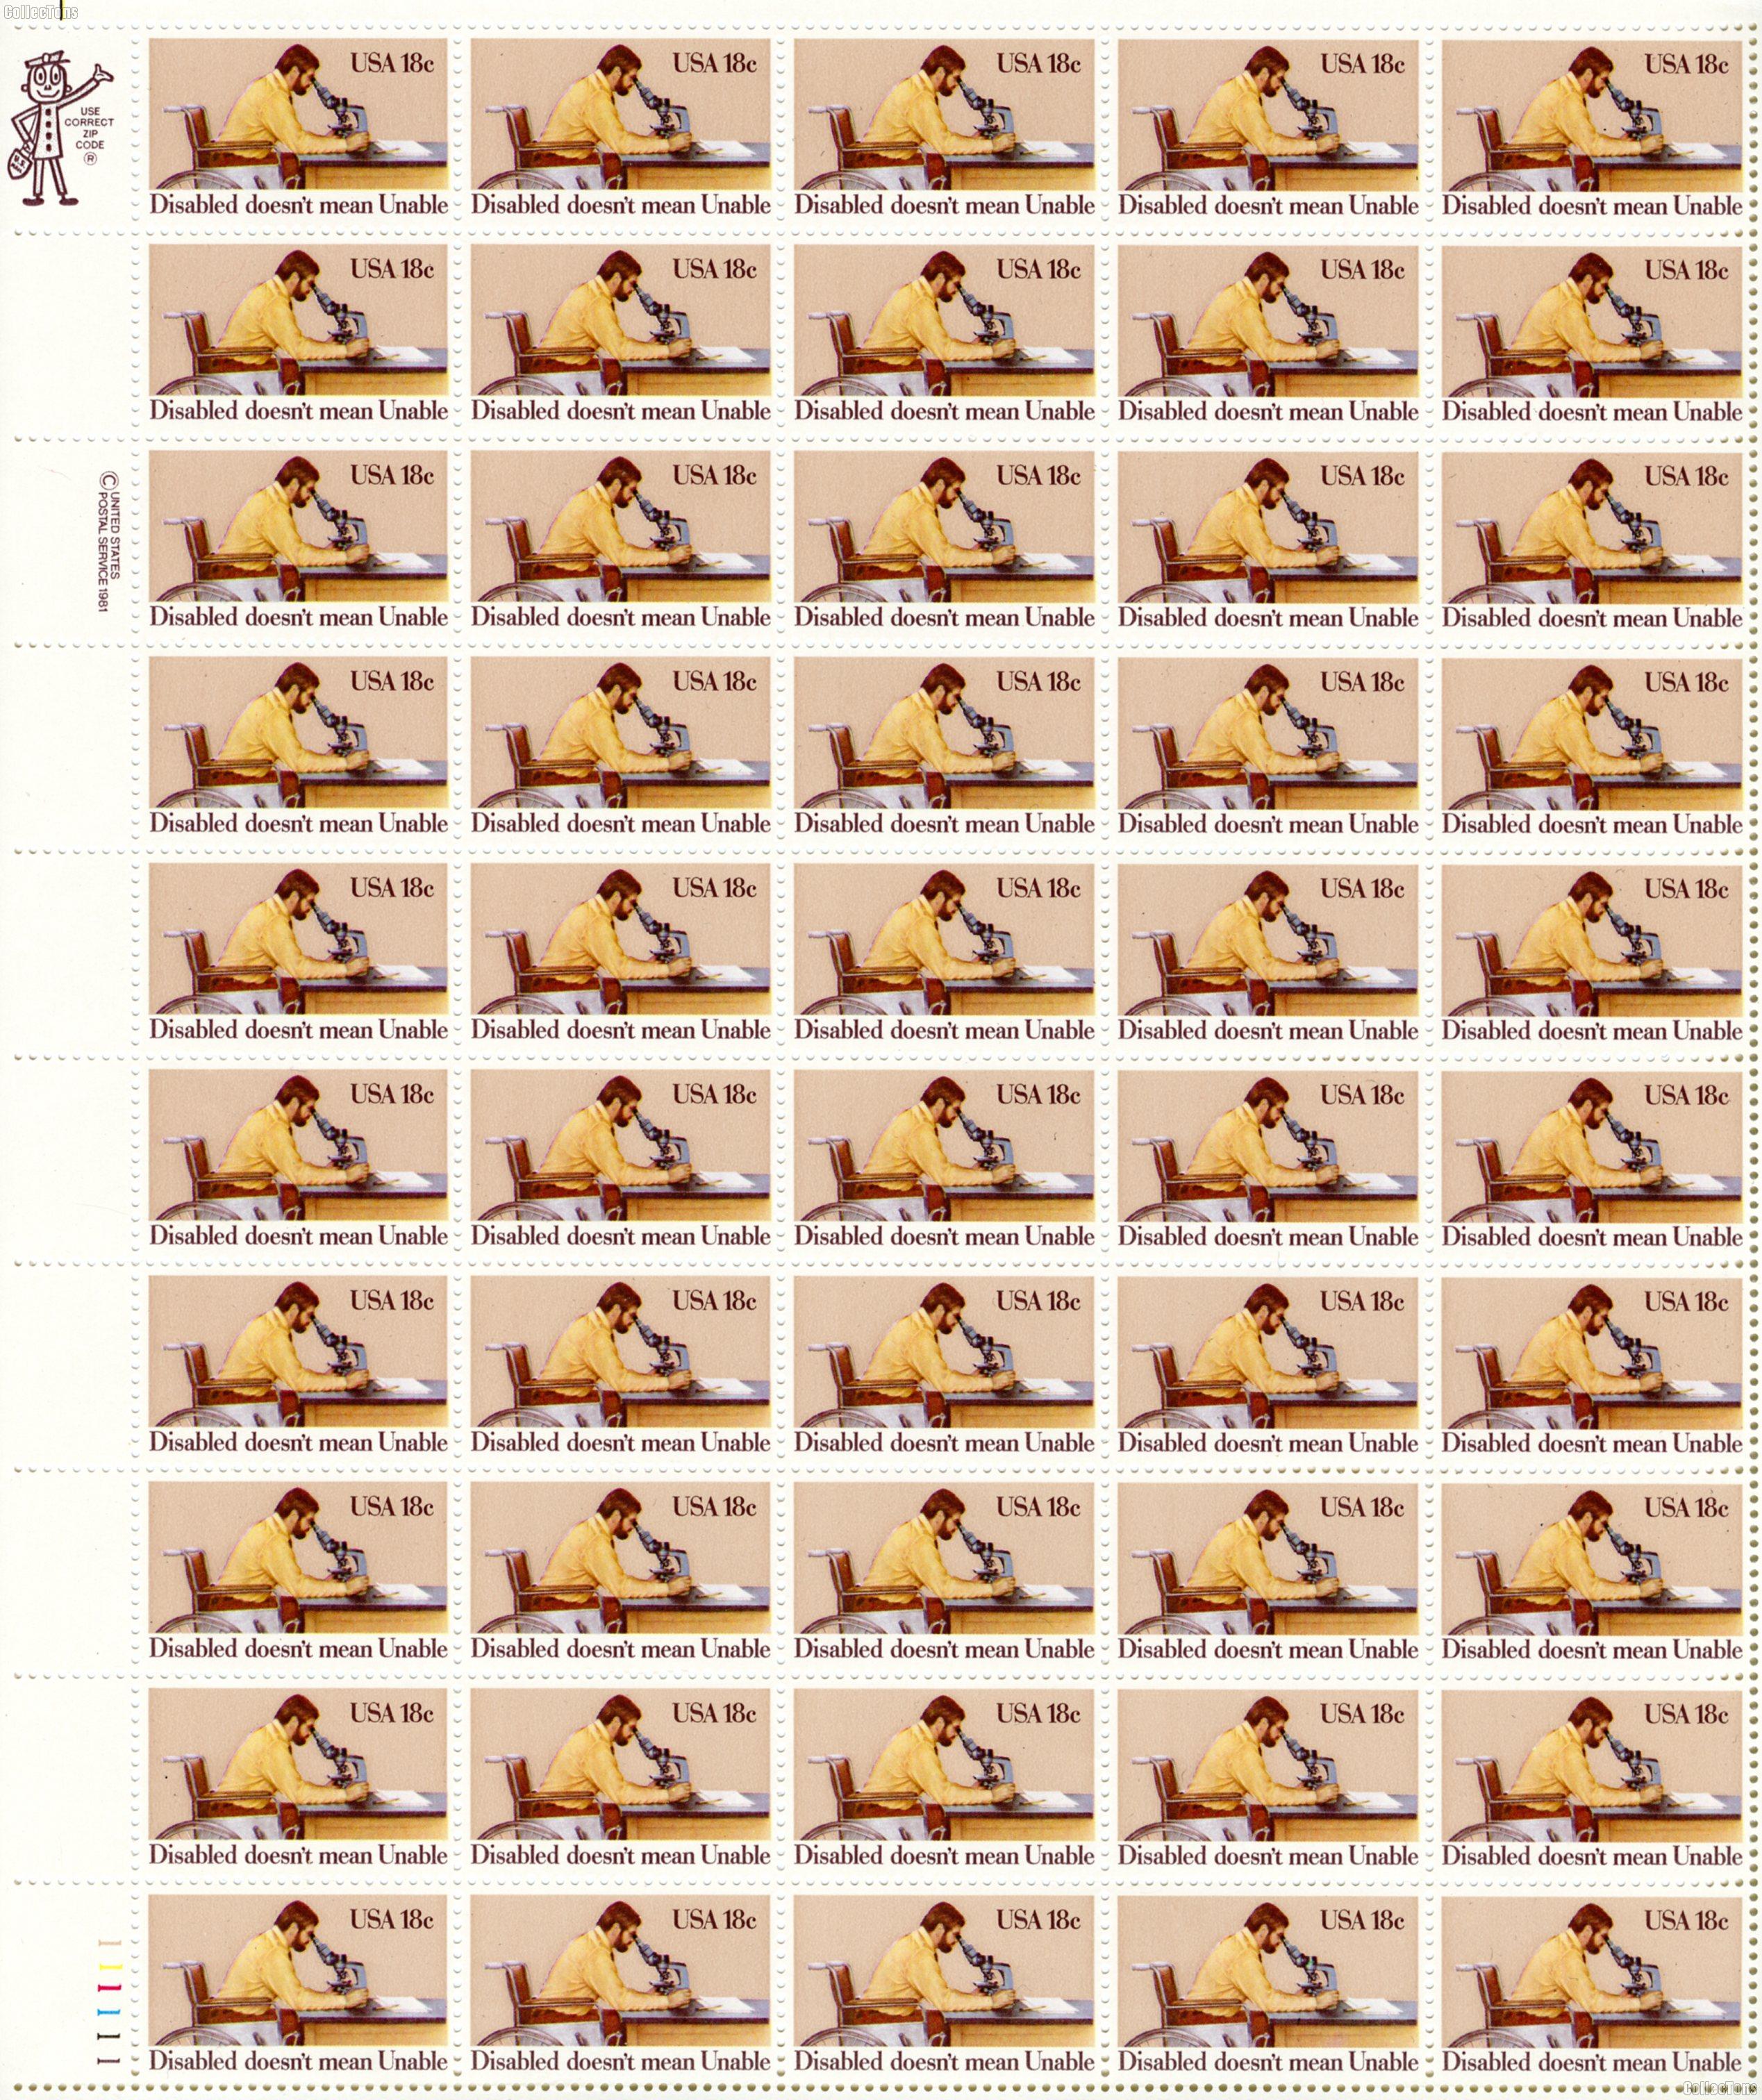 1981 Disabled Persons 18 Cent US Postage Stamp MNH Sheet of 50 Scott #1925